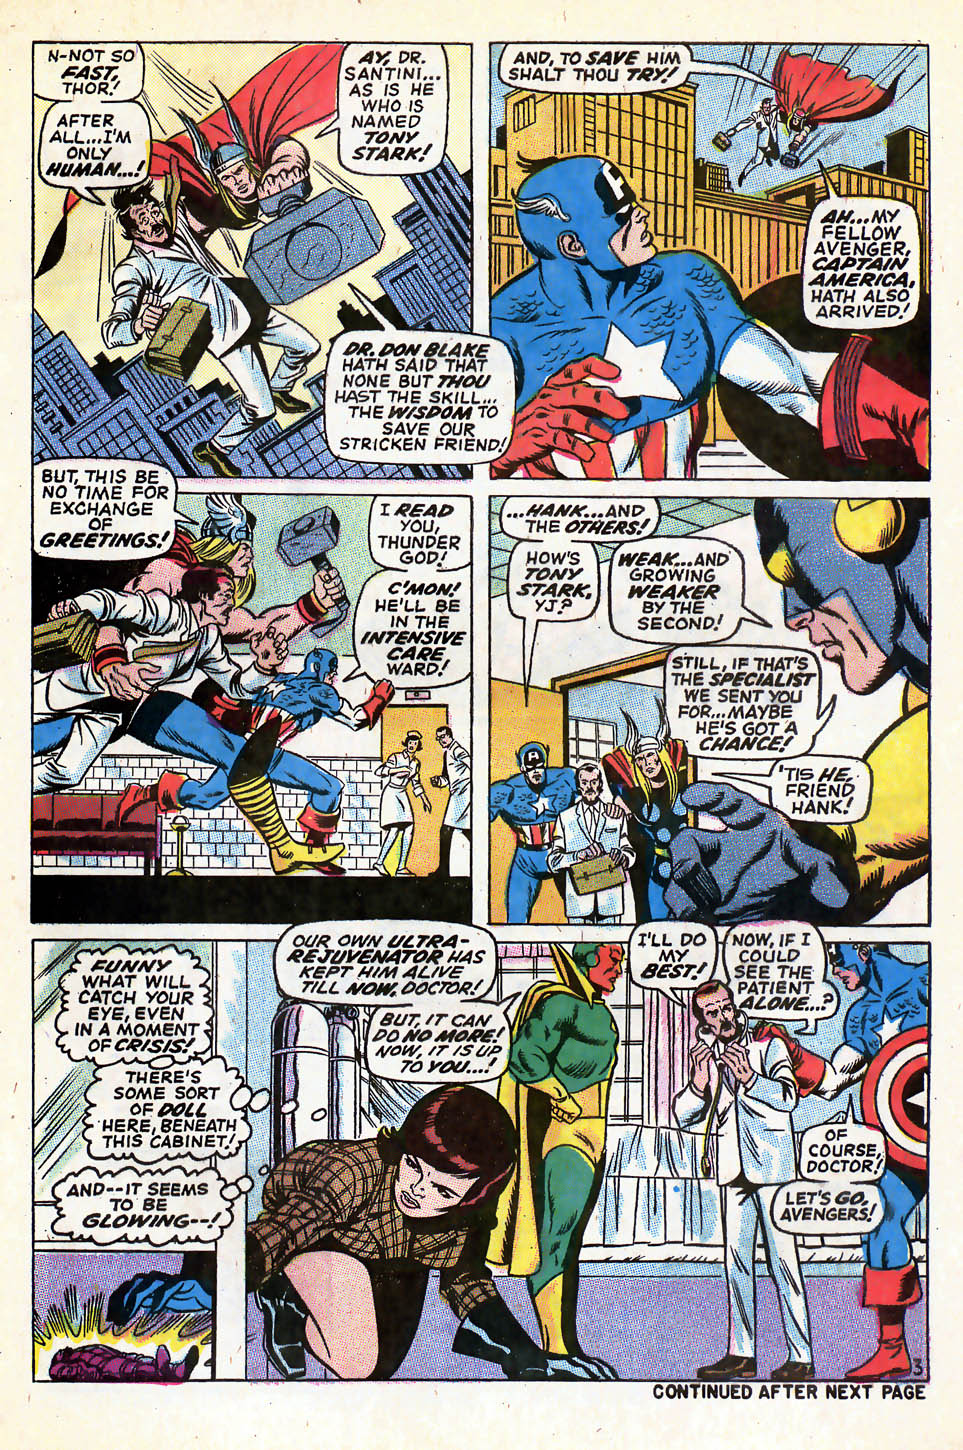 The Avengers (1963) 69 Page 3